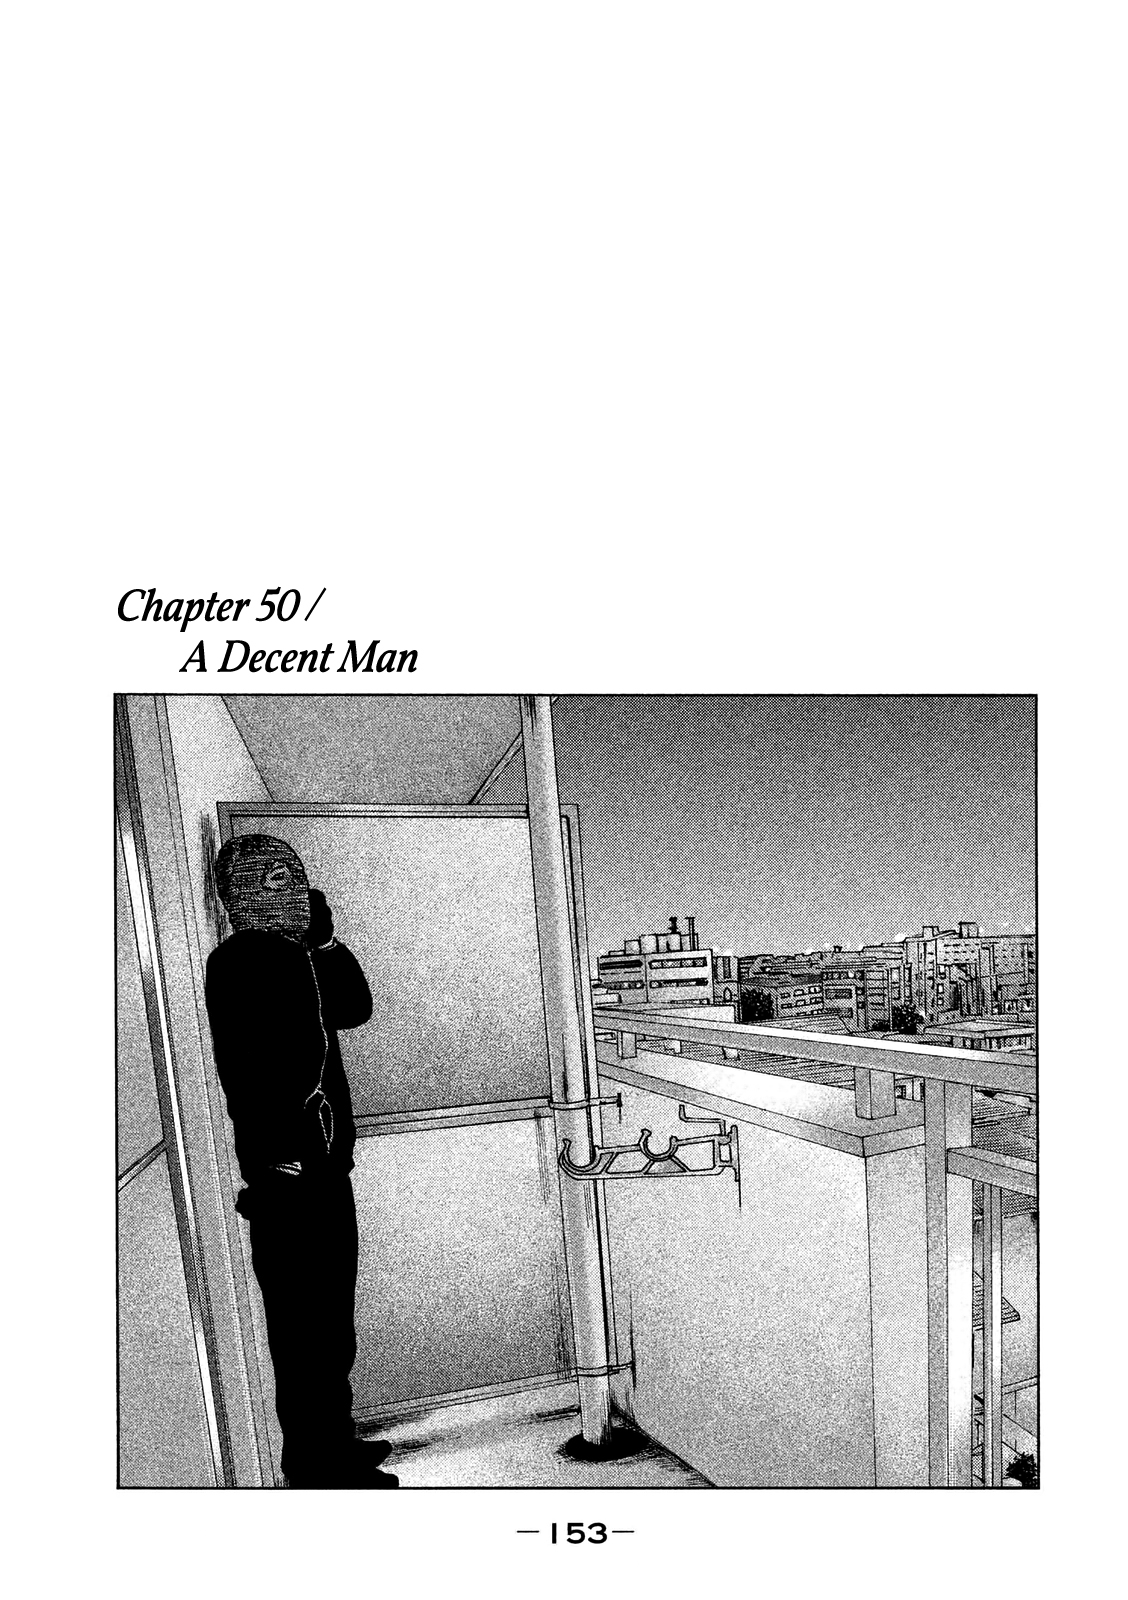 The Fable Vol. 5 Ch. 50 A Decent Man